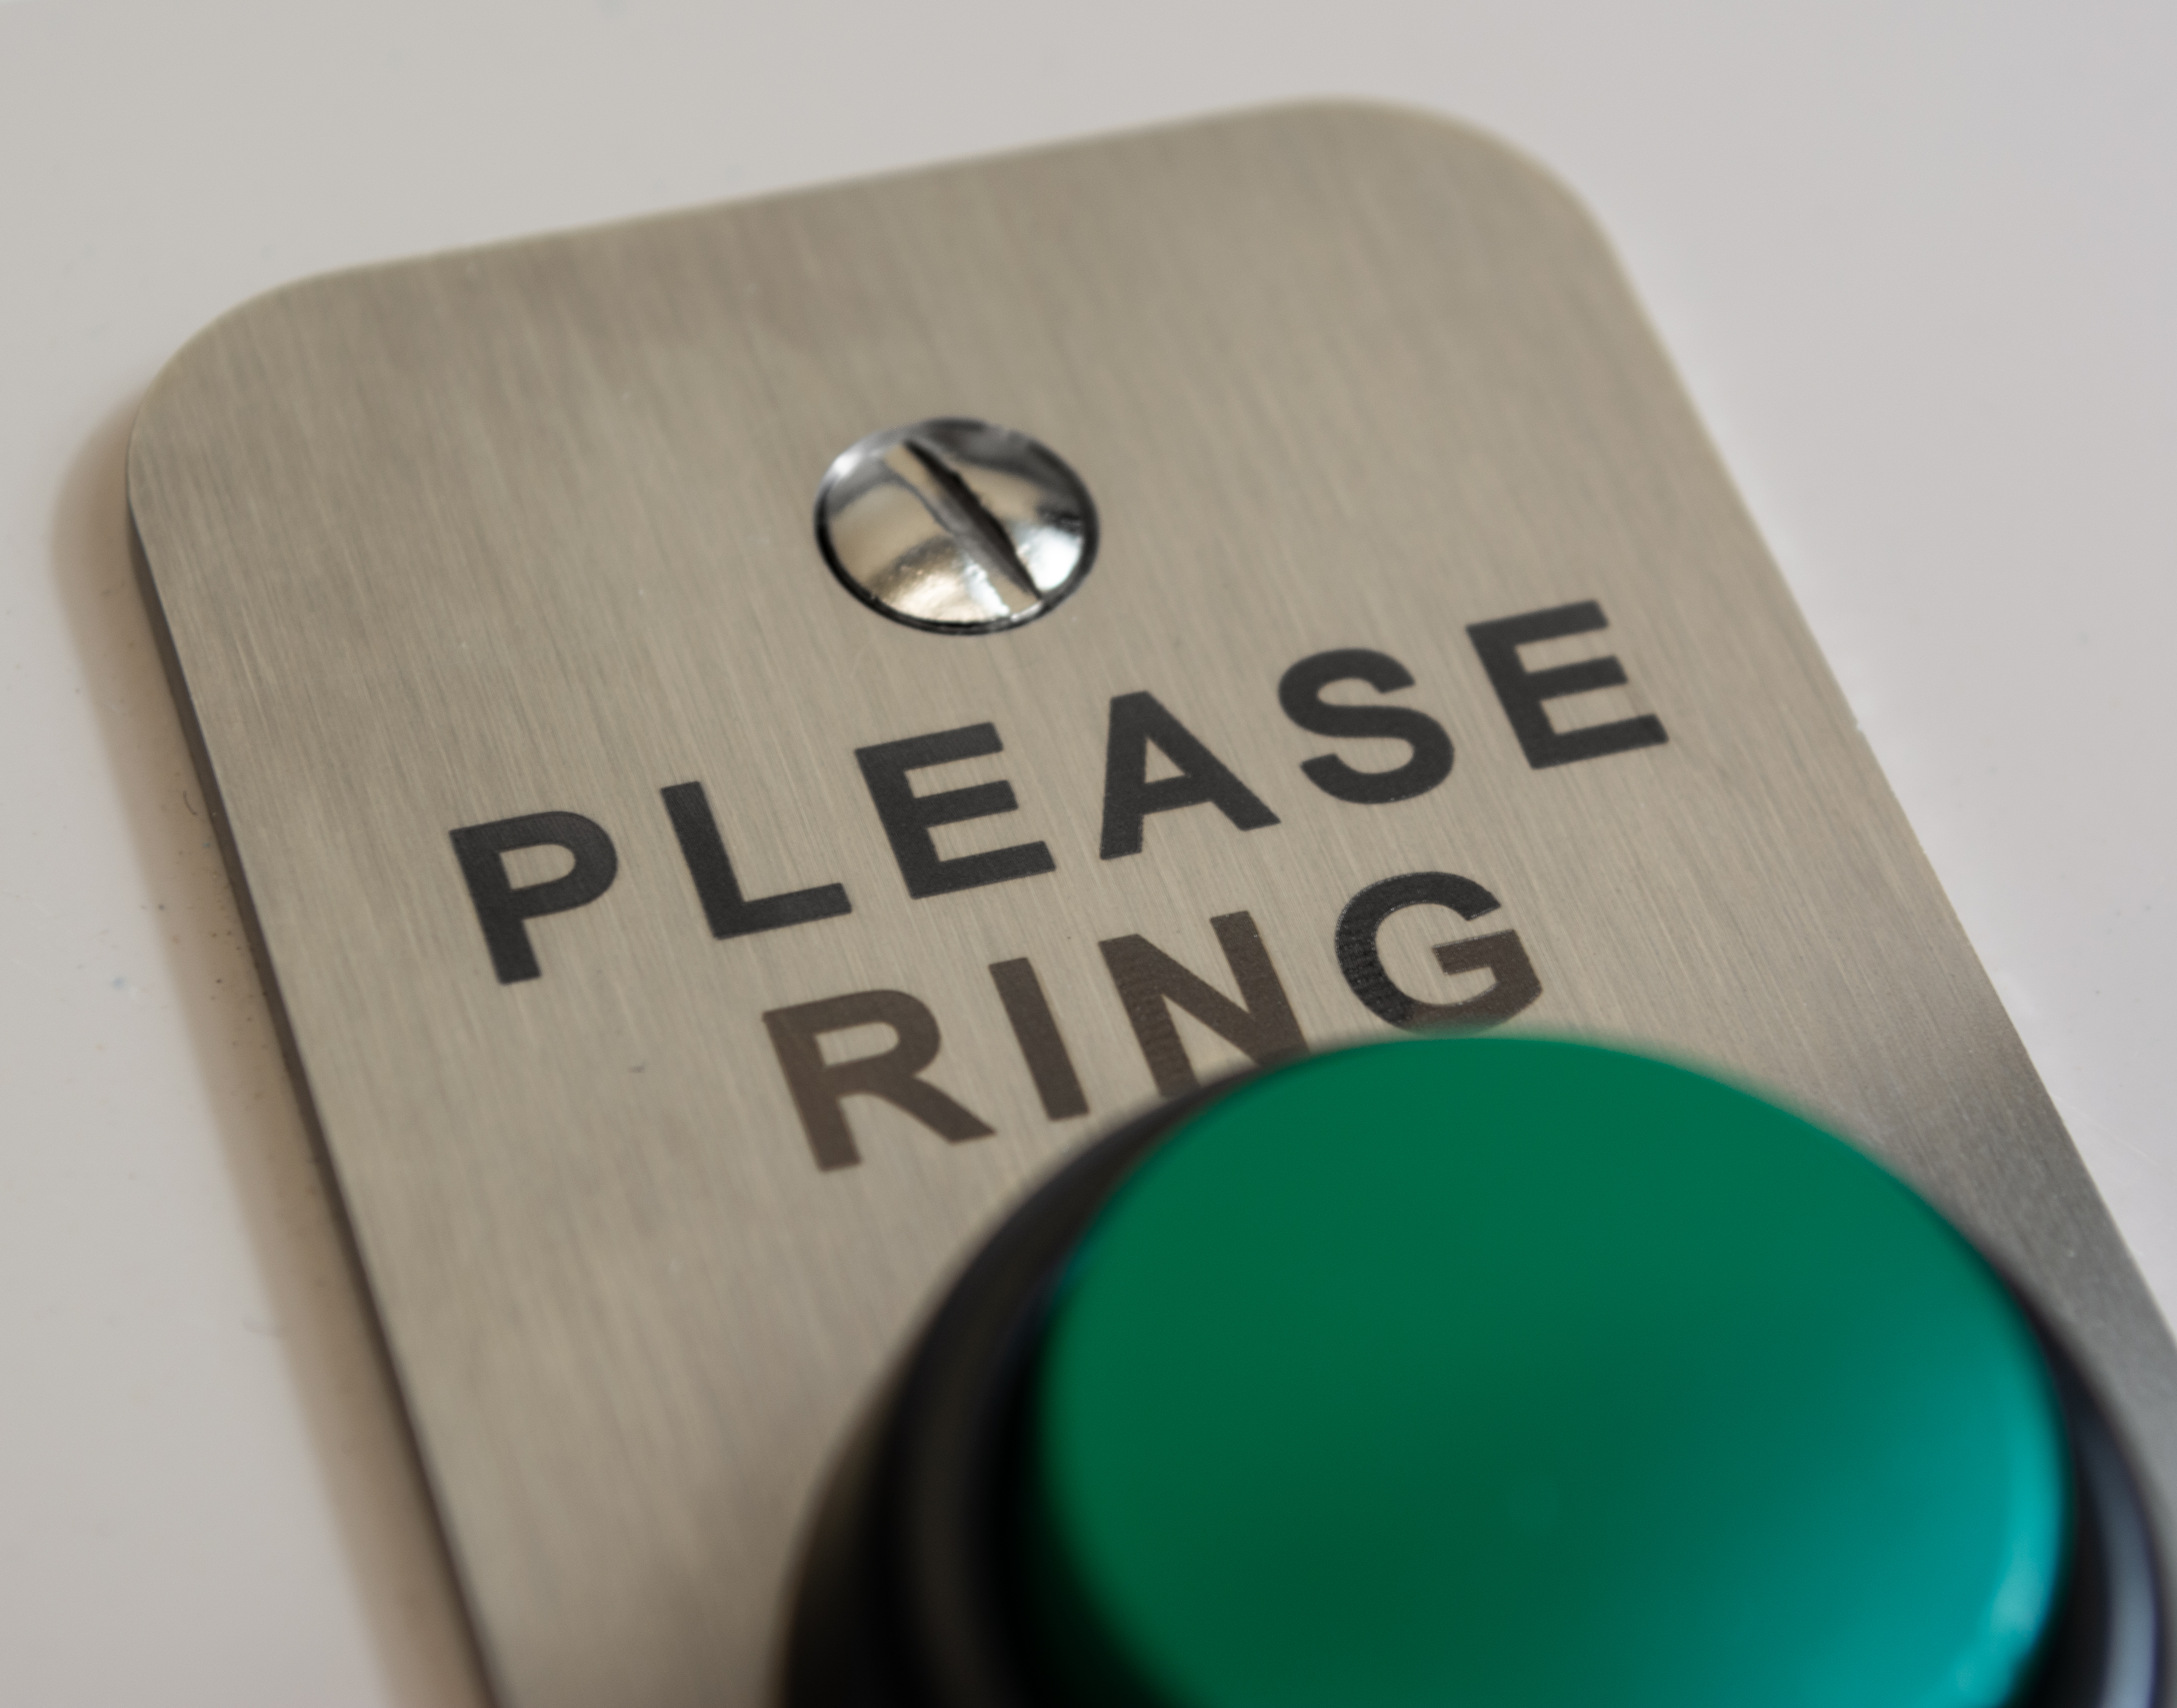 'Please ring'